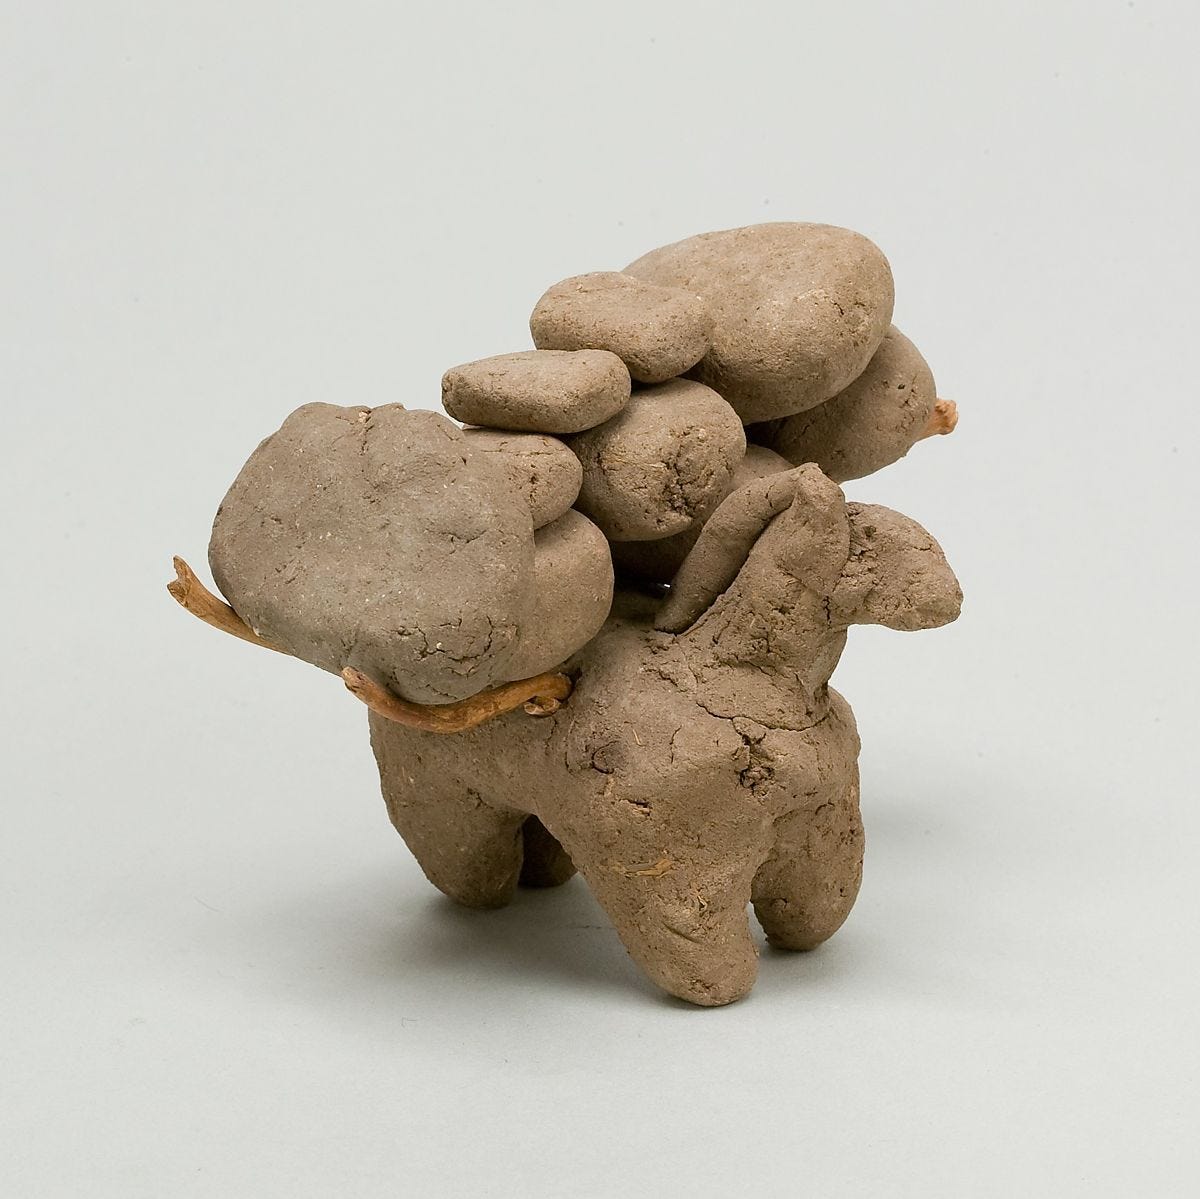 Donkey with packs on its back, Clay, twigs 